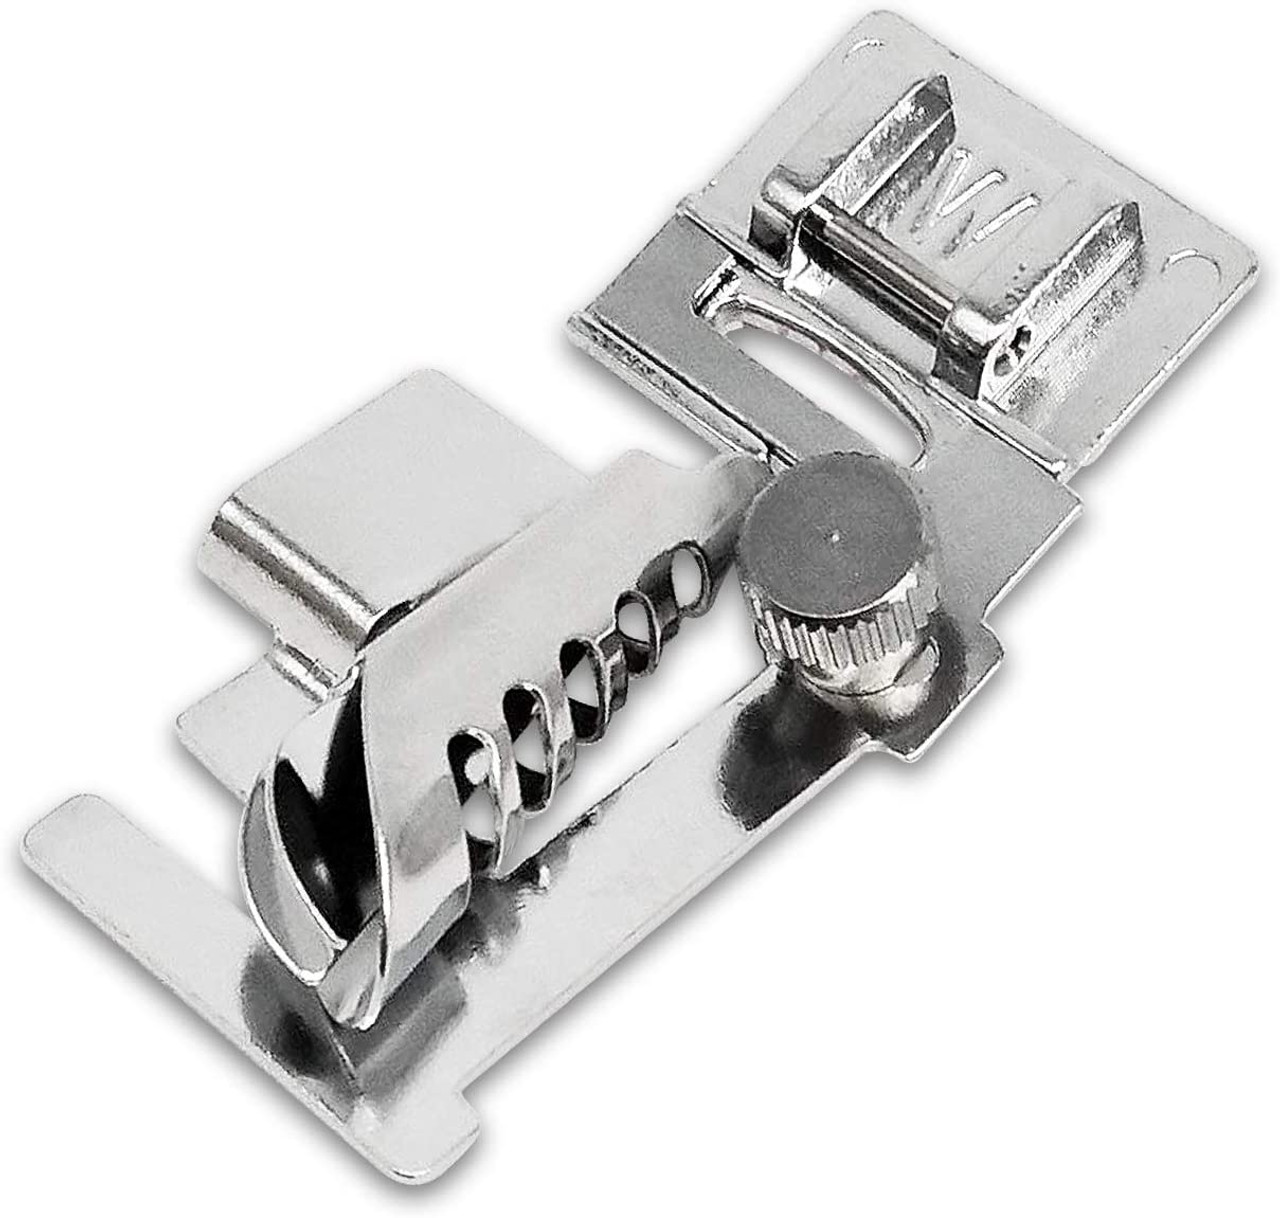 1 pcs Adjustable Bias Tape Binding Foot Snap On Presser Foot For Brother  Janome Sewing Machine Accessories Tools ZH955 6290 - Price history & Review, AliExpress Seller - Singer parts Store